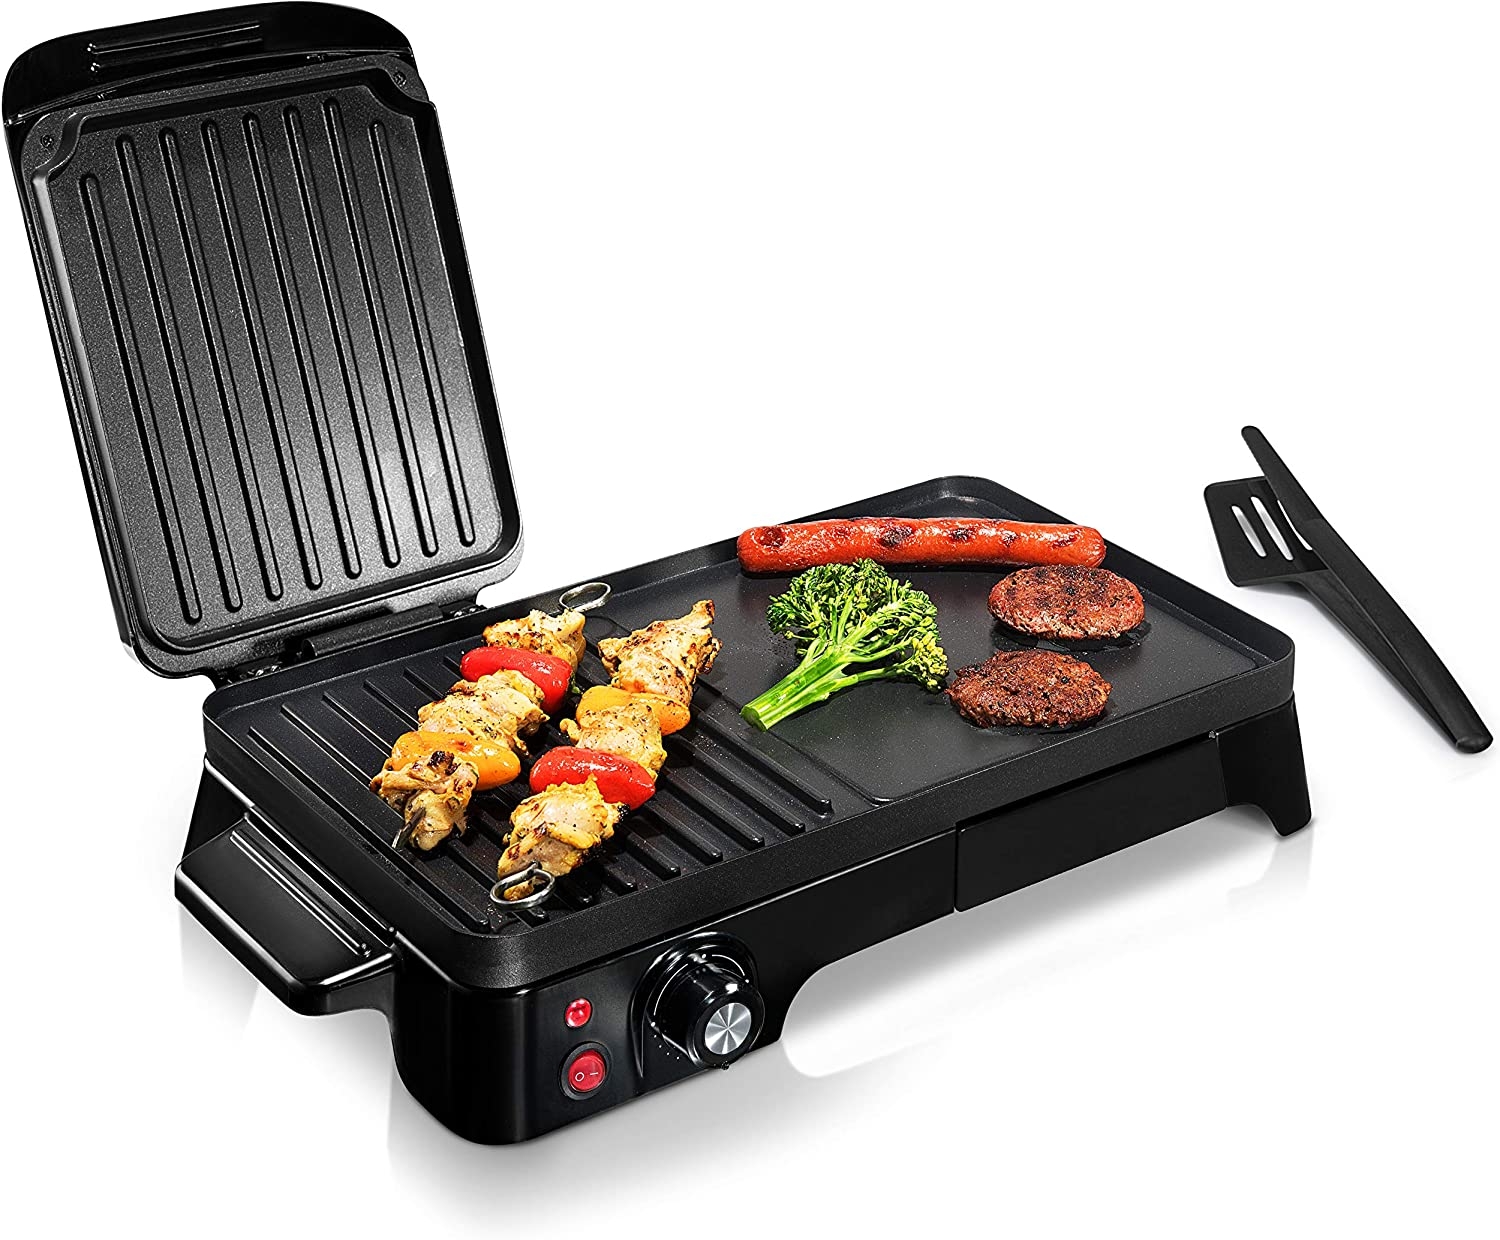 NutriChef Electric Griddle – Dual Hot Plate Cooktop Crepe Maker with Press Grill, Nonstick Coating, Rotary Temperature Control,